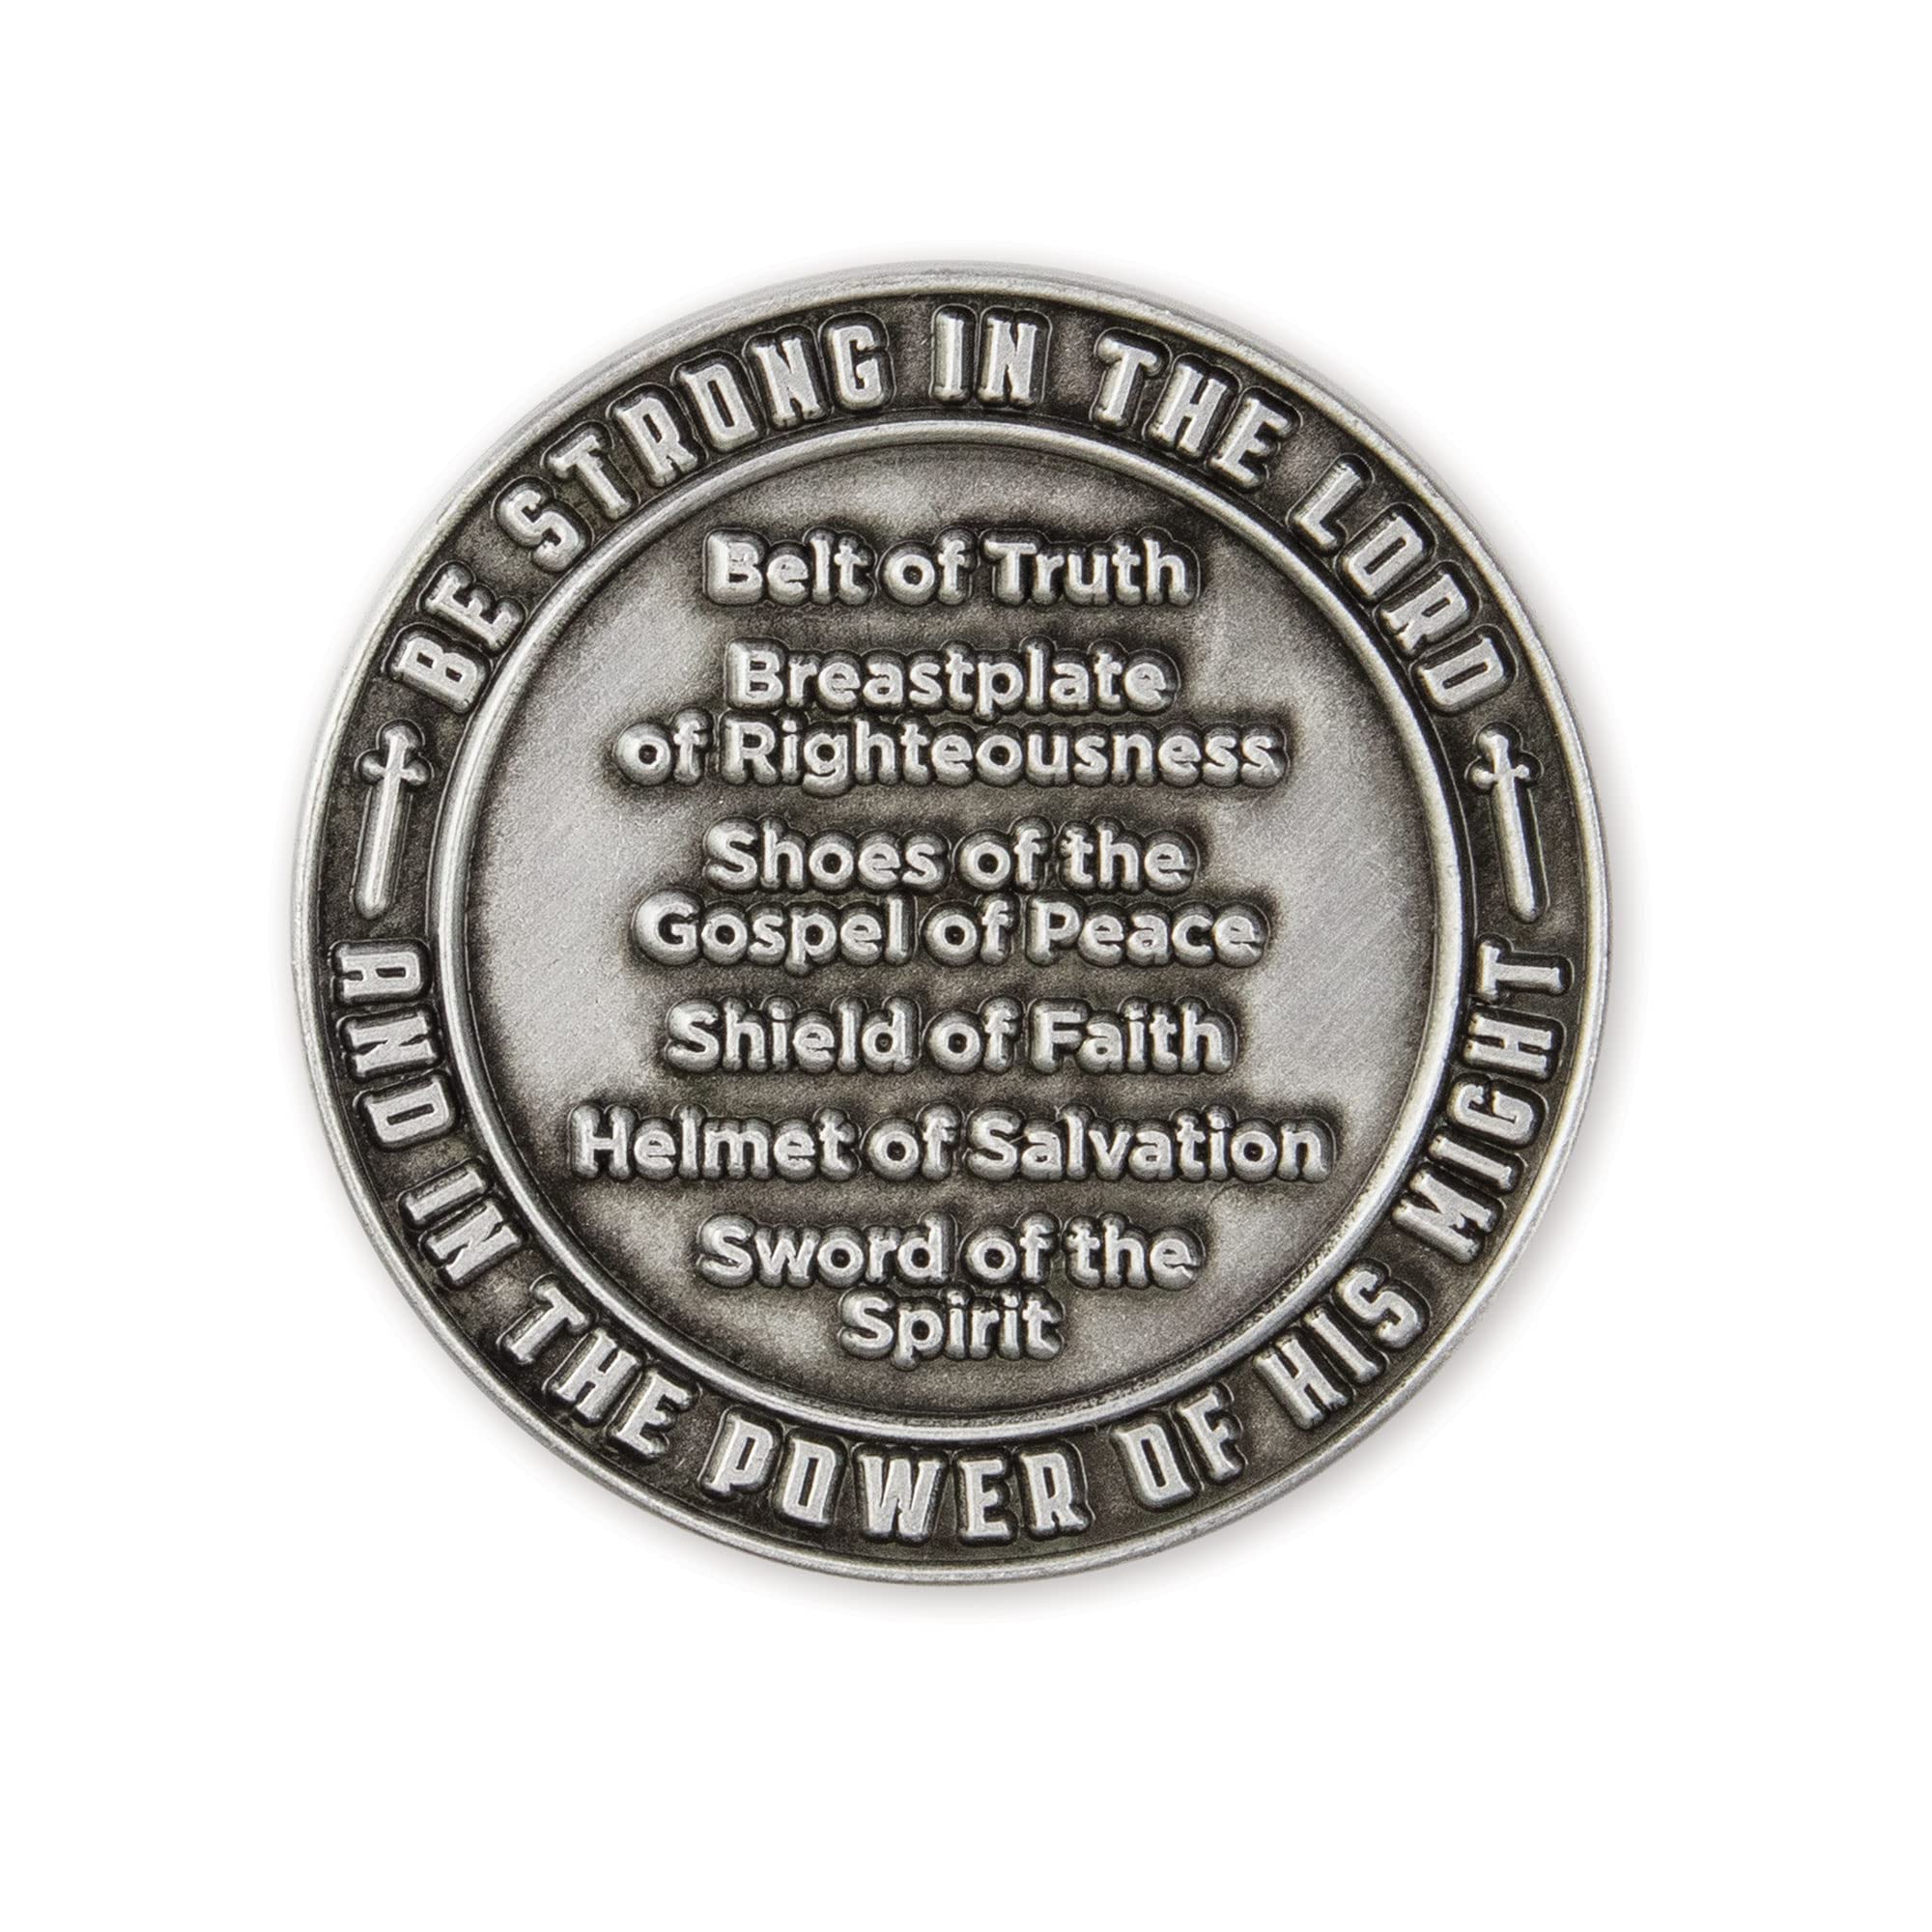 Armor of God Love Expression Coin for Public Servants & Law Enforcement, Keepsake Pocket Token of Prayer & Divine Protection for Men & Women, EDC Coin, Thinking of You Gift of Appreciation